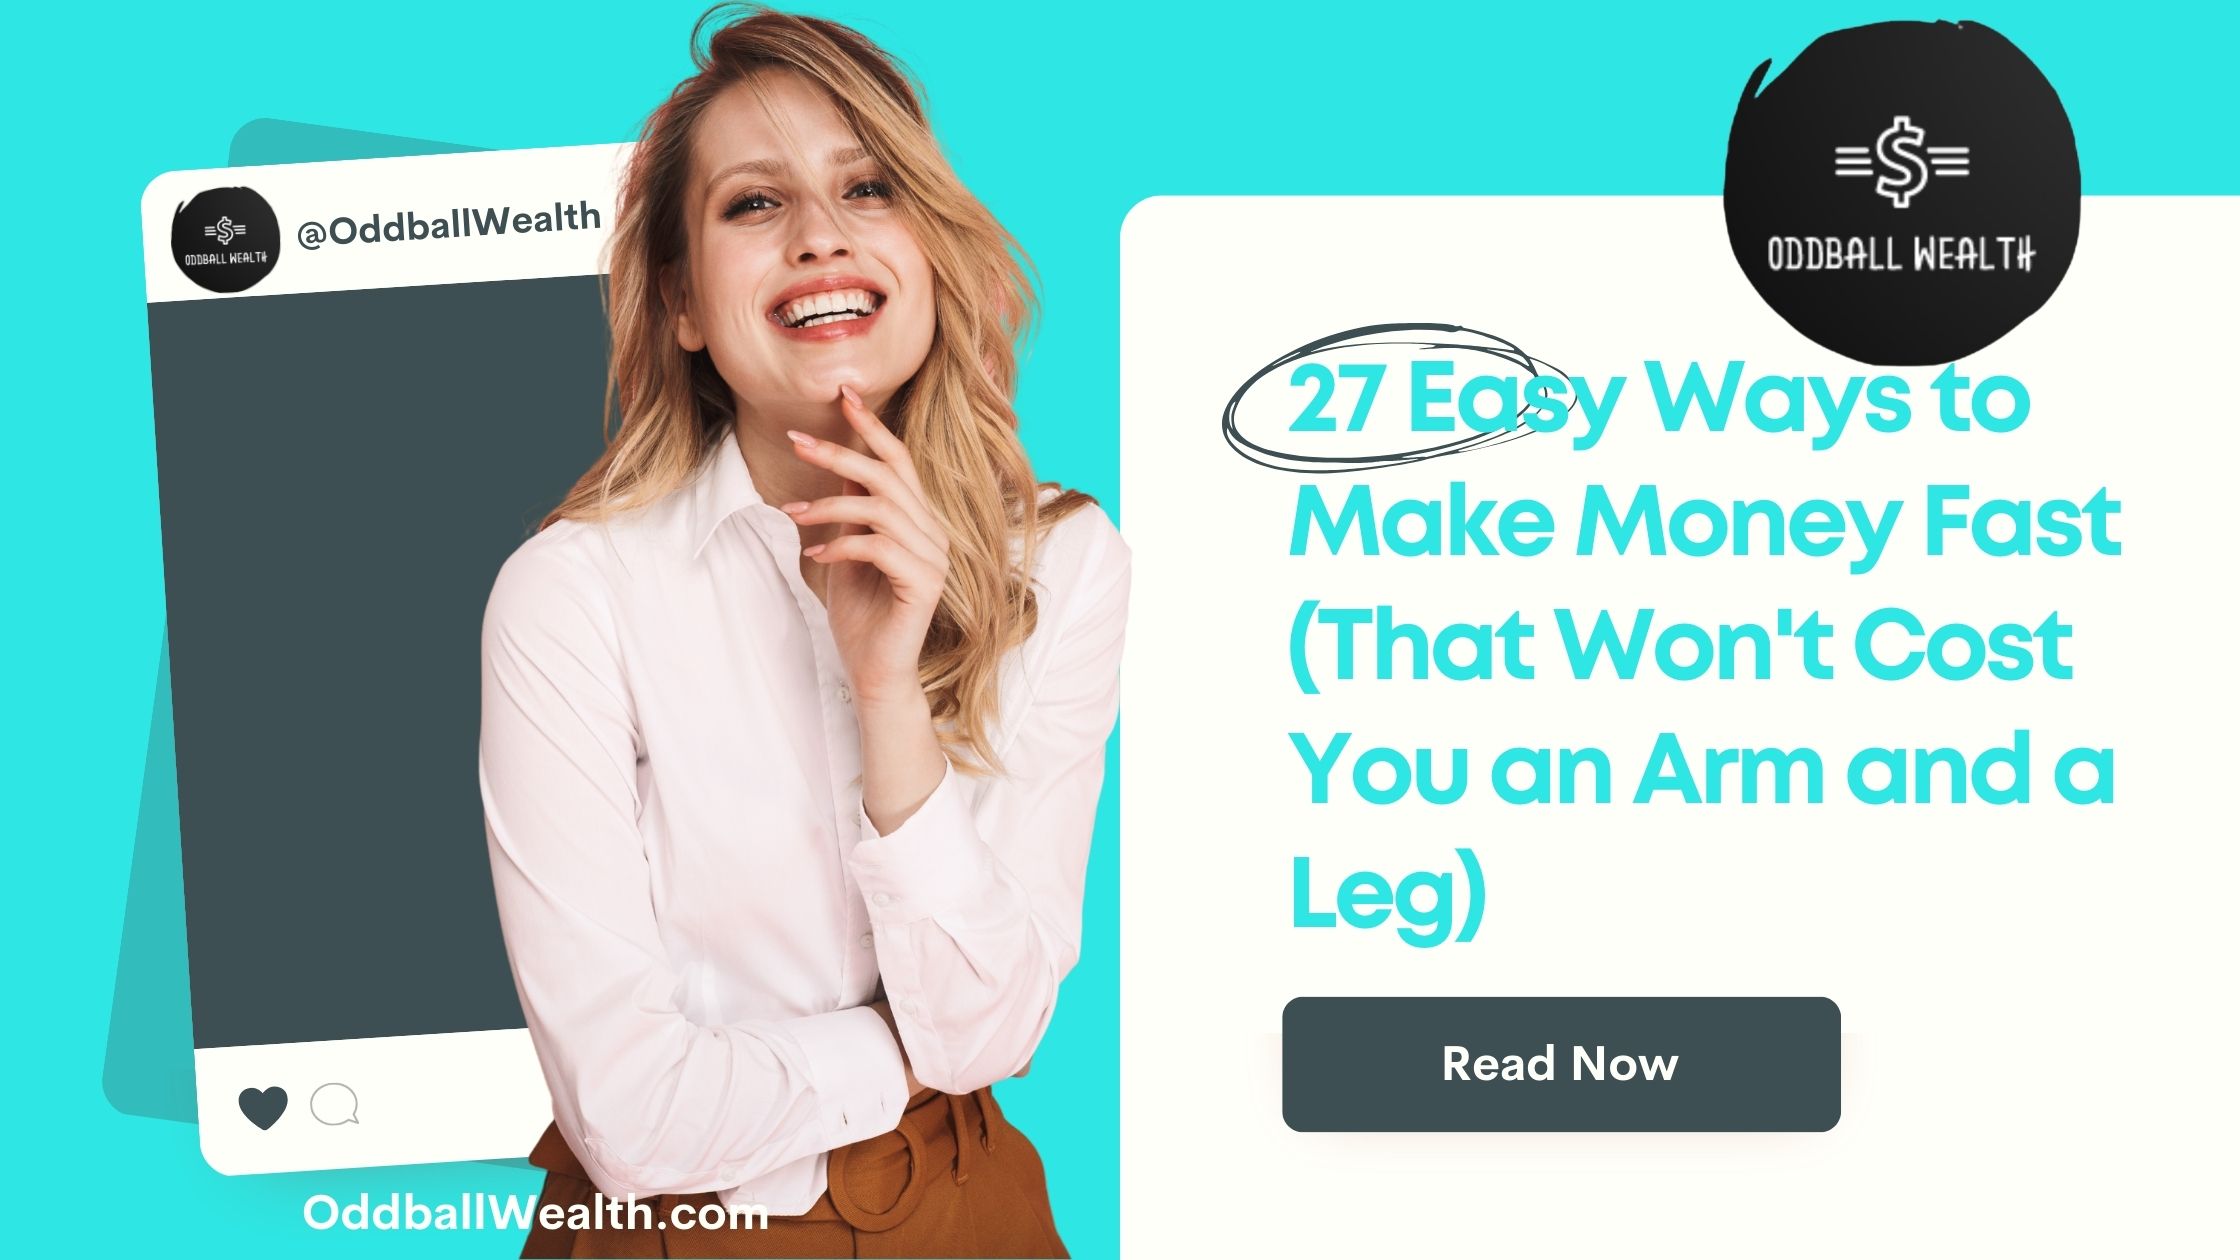 27 Easy Ways to Make Money Fast (That Won't Cost You an Arm and a Leg!)